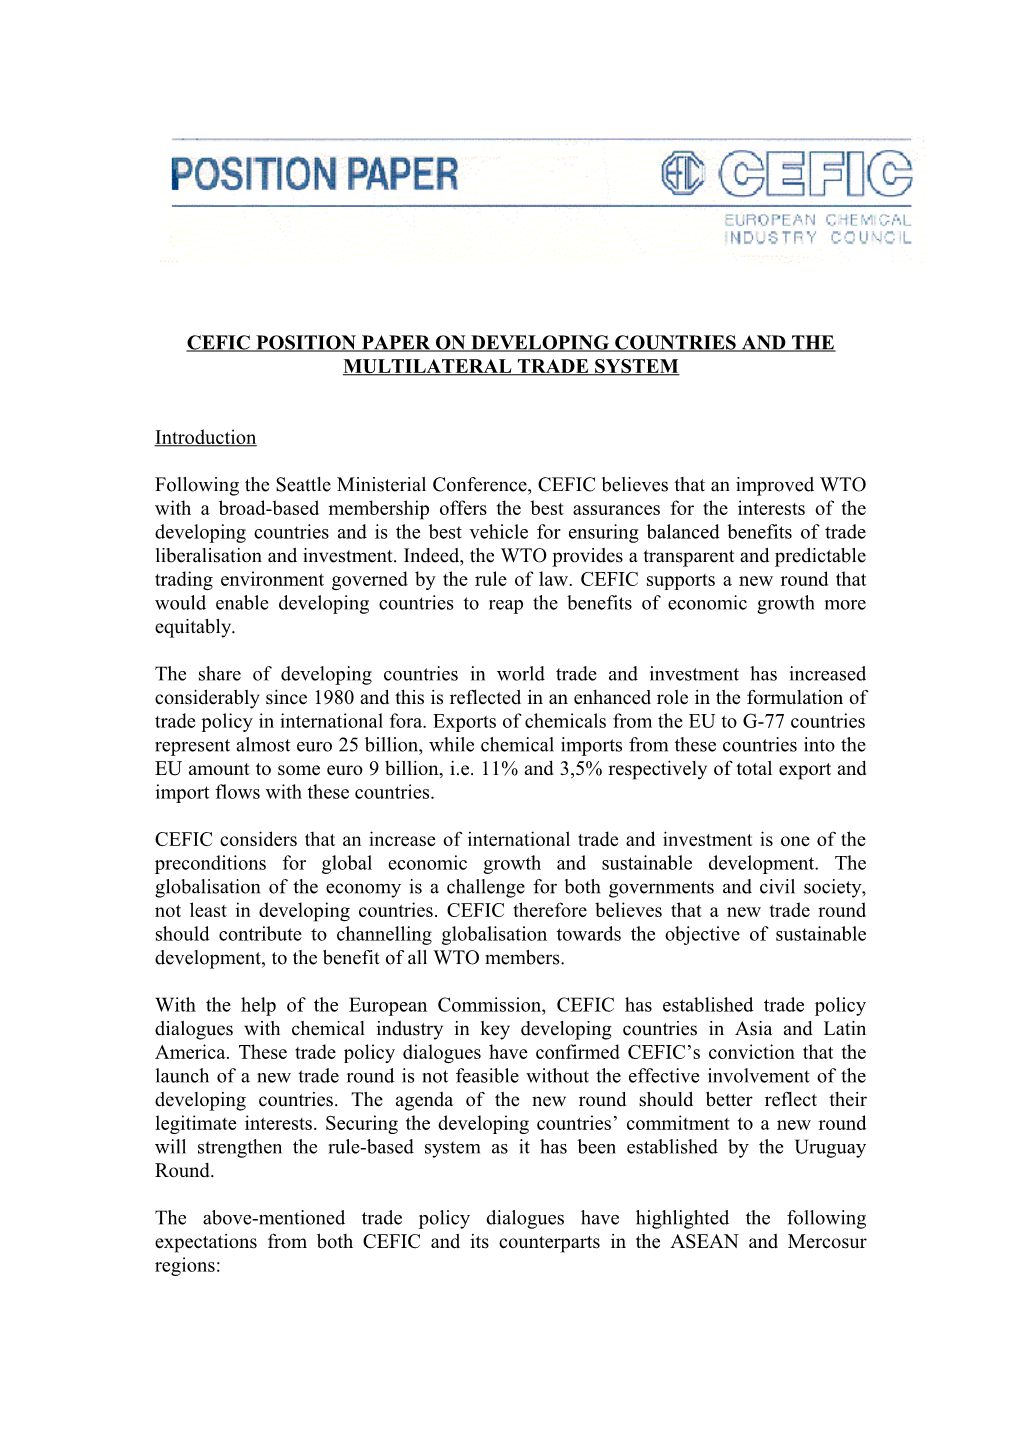 Draft Cefic Position Paper on Developing Countries and the Multilateral Trade System